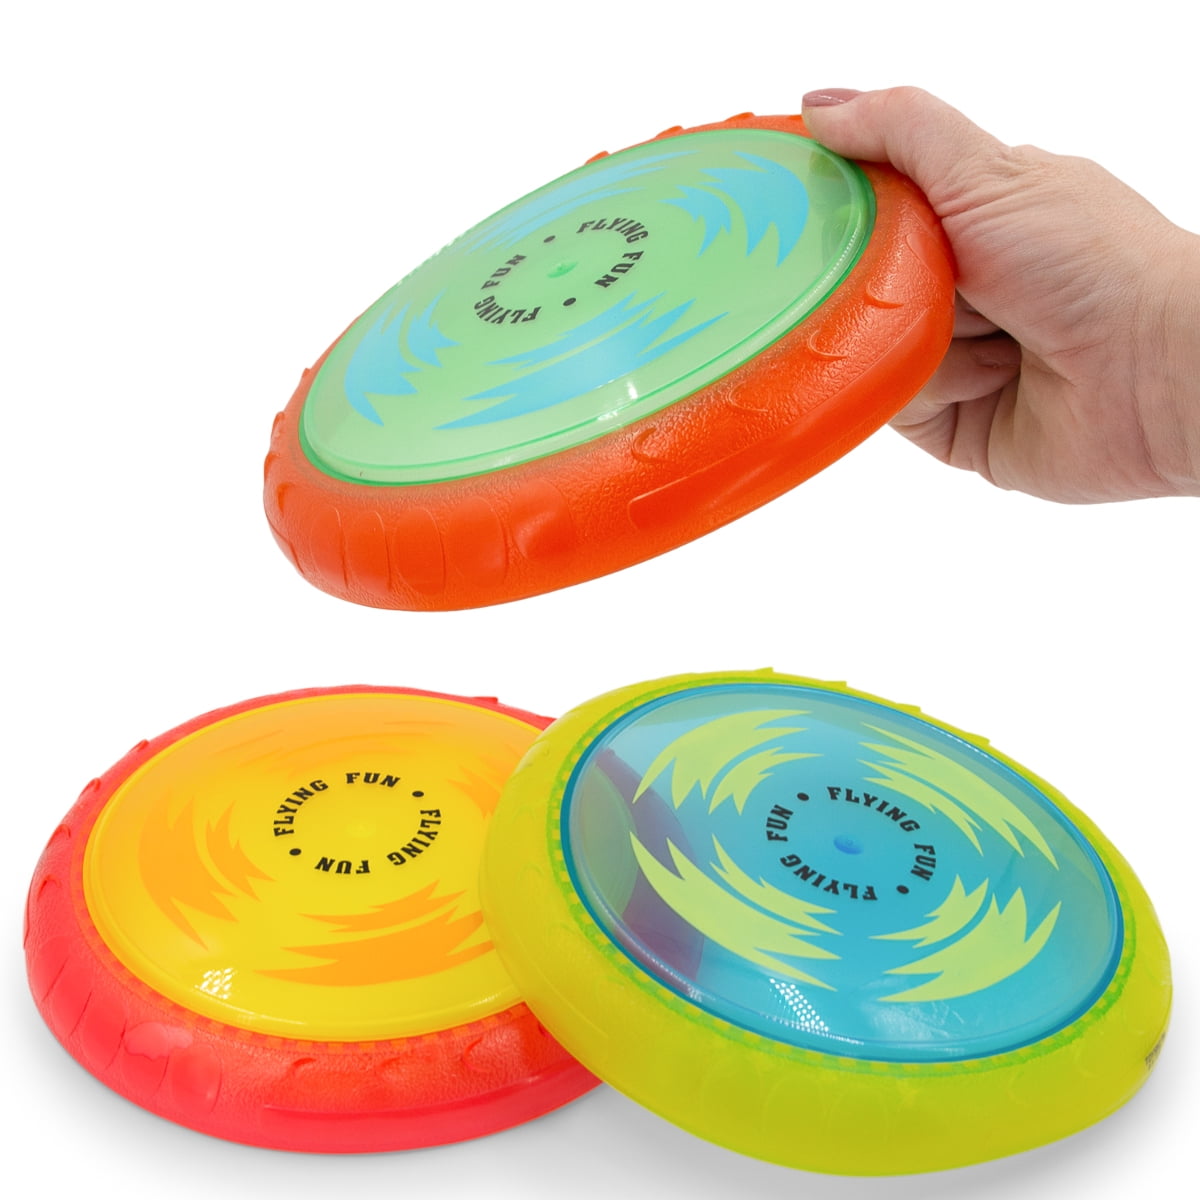 Classic Frisbee Disks Outdoor Sports Soft Flexible Rubber Durable Training Gears 